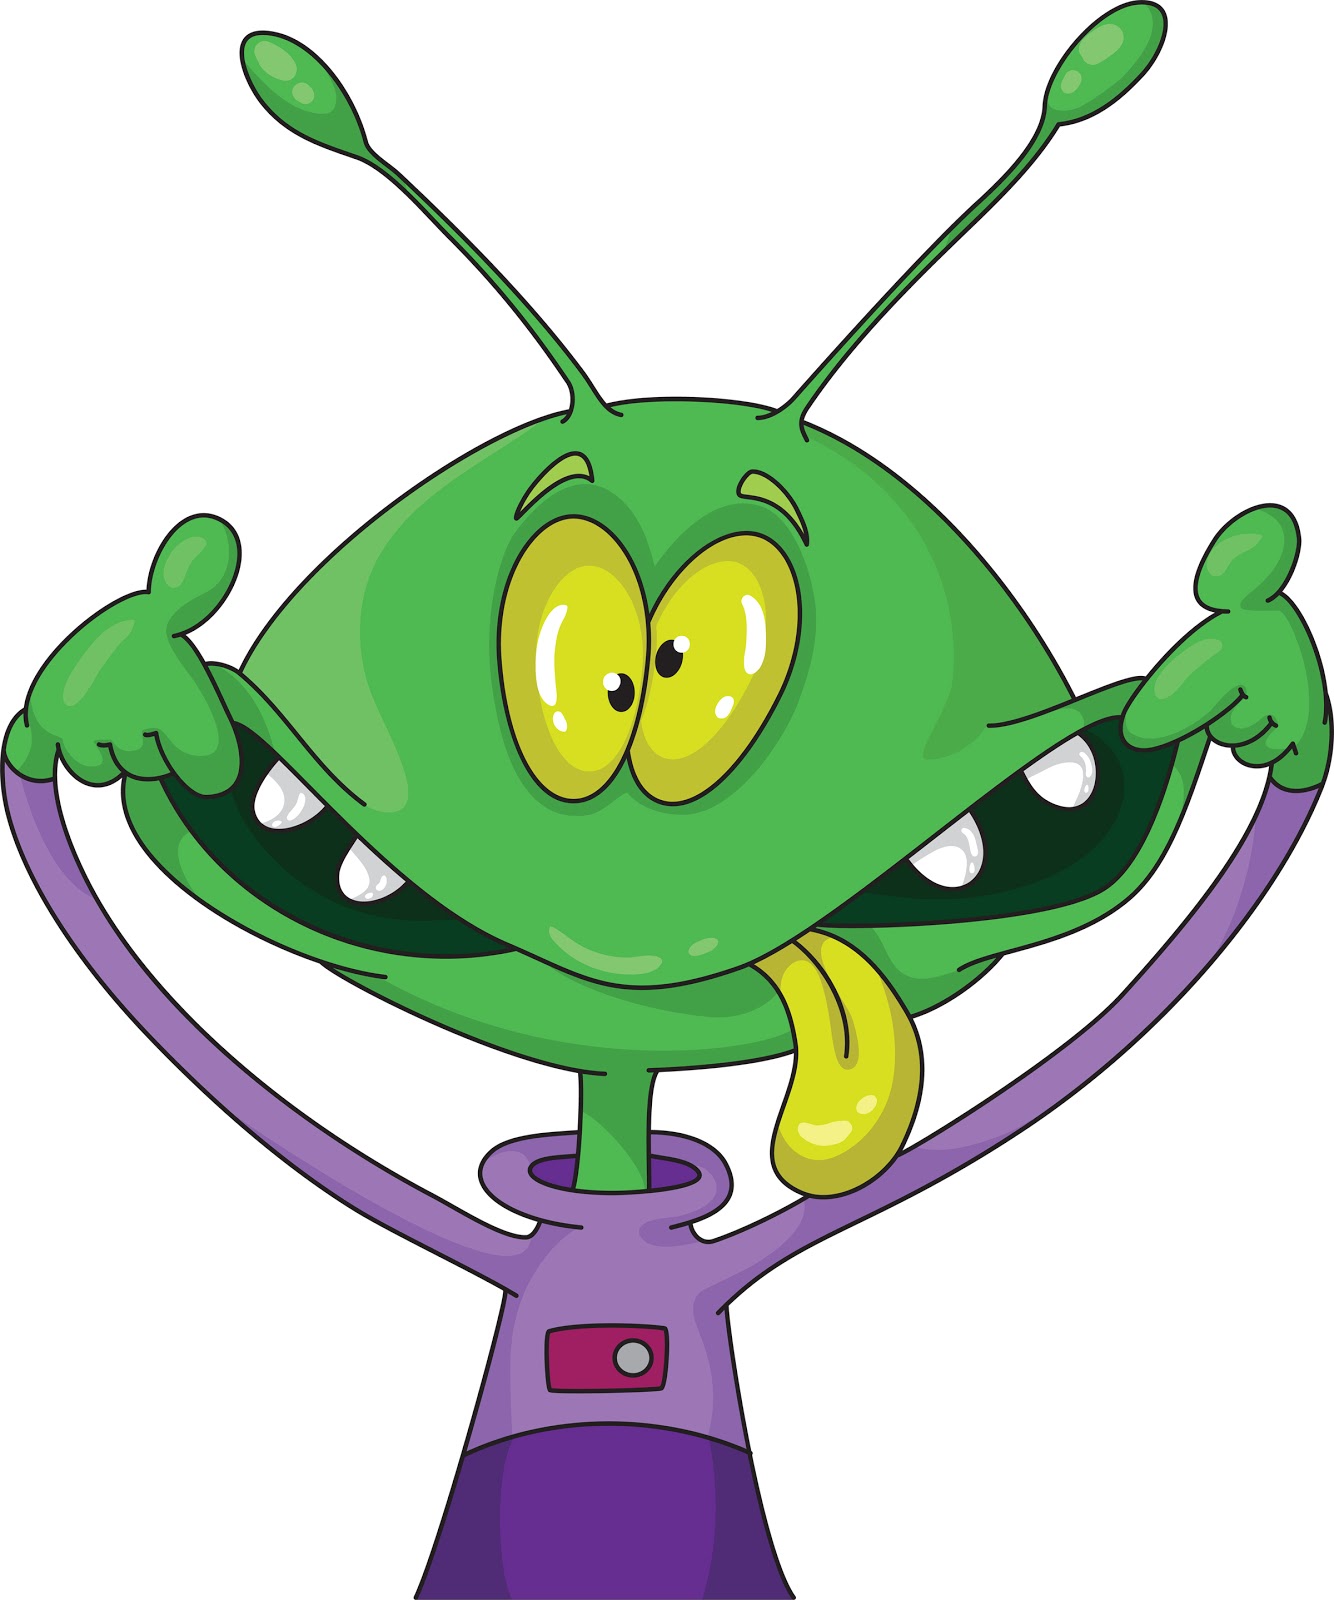 Aliens, Clip art and Smiling